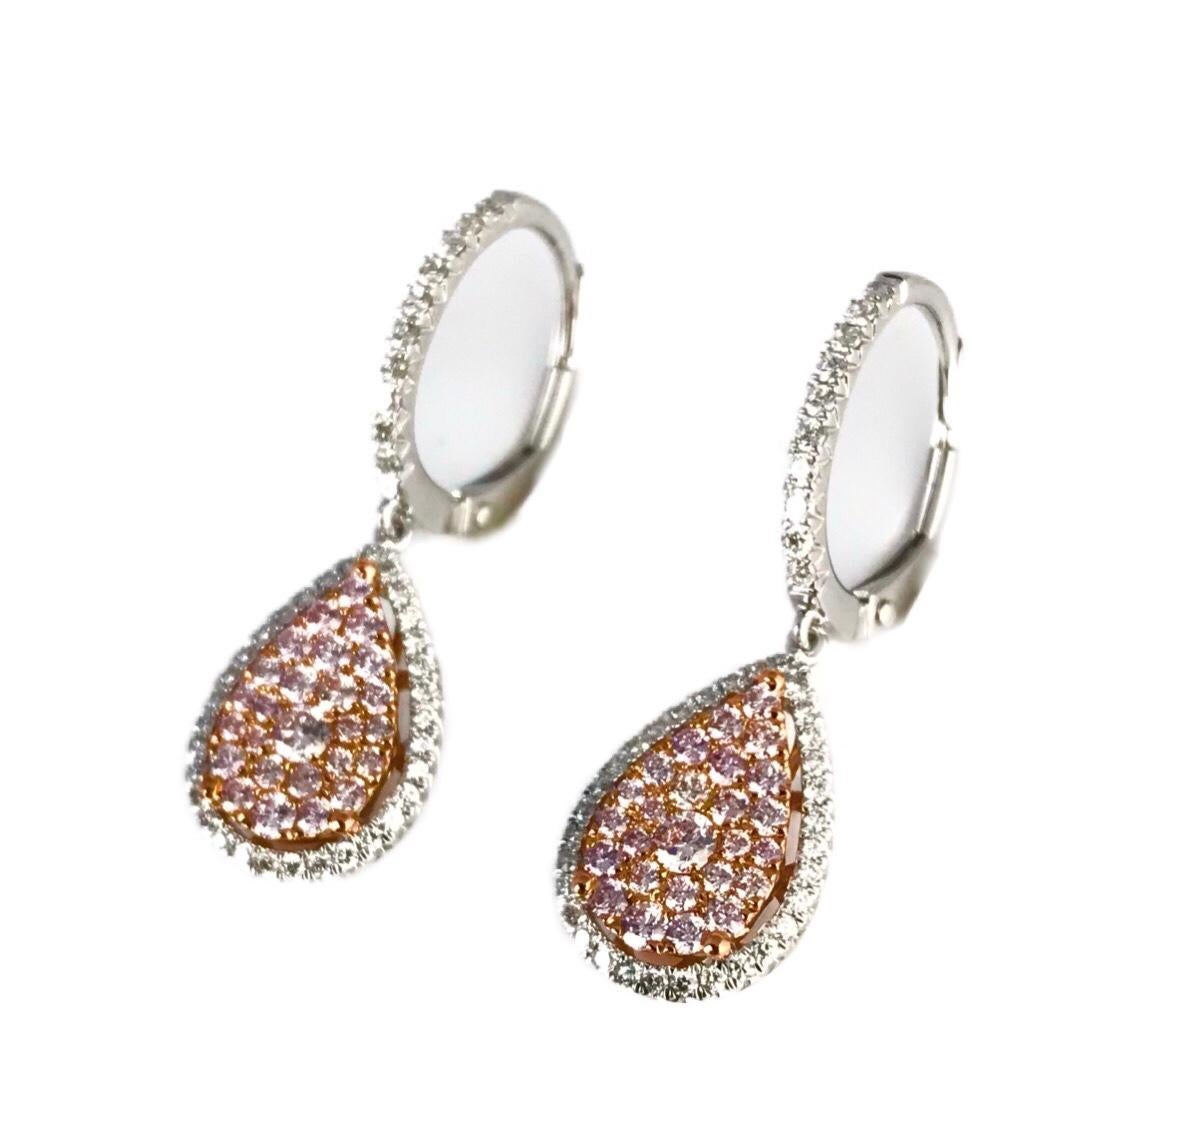 These beautiful lever-back dangle earrings feature multiple round pink diamonds arranged in a pear shape, inside a halo of round white diamonds. Additional diamonds decorate the front of the hoop, bringing the total diamond weight to 0.95